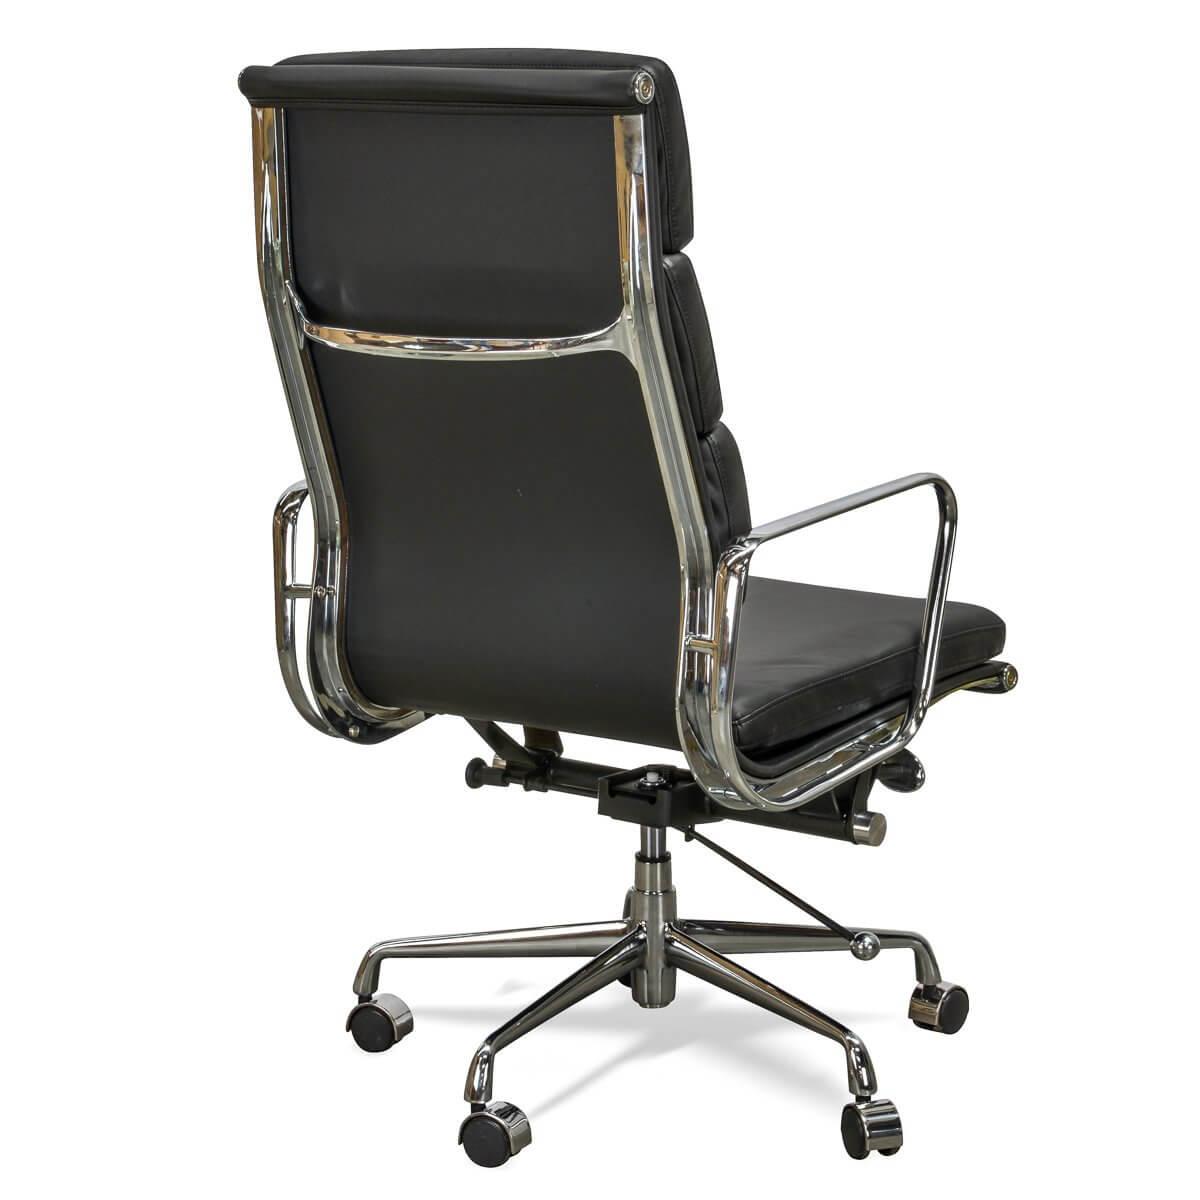 Calibre Soft Pad Office Chair - Black OC104-Office/Gaming Chairs-Calibre-Prime Furniture